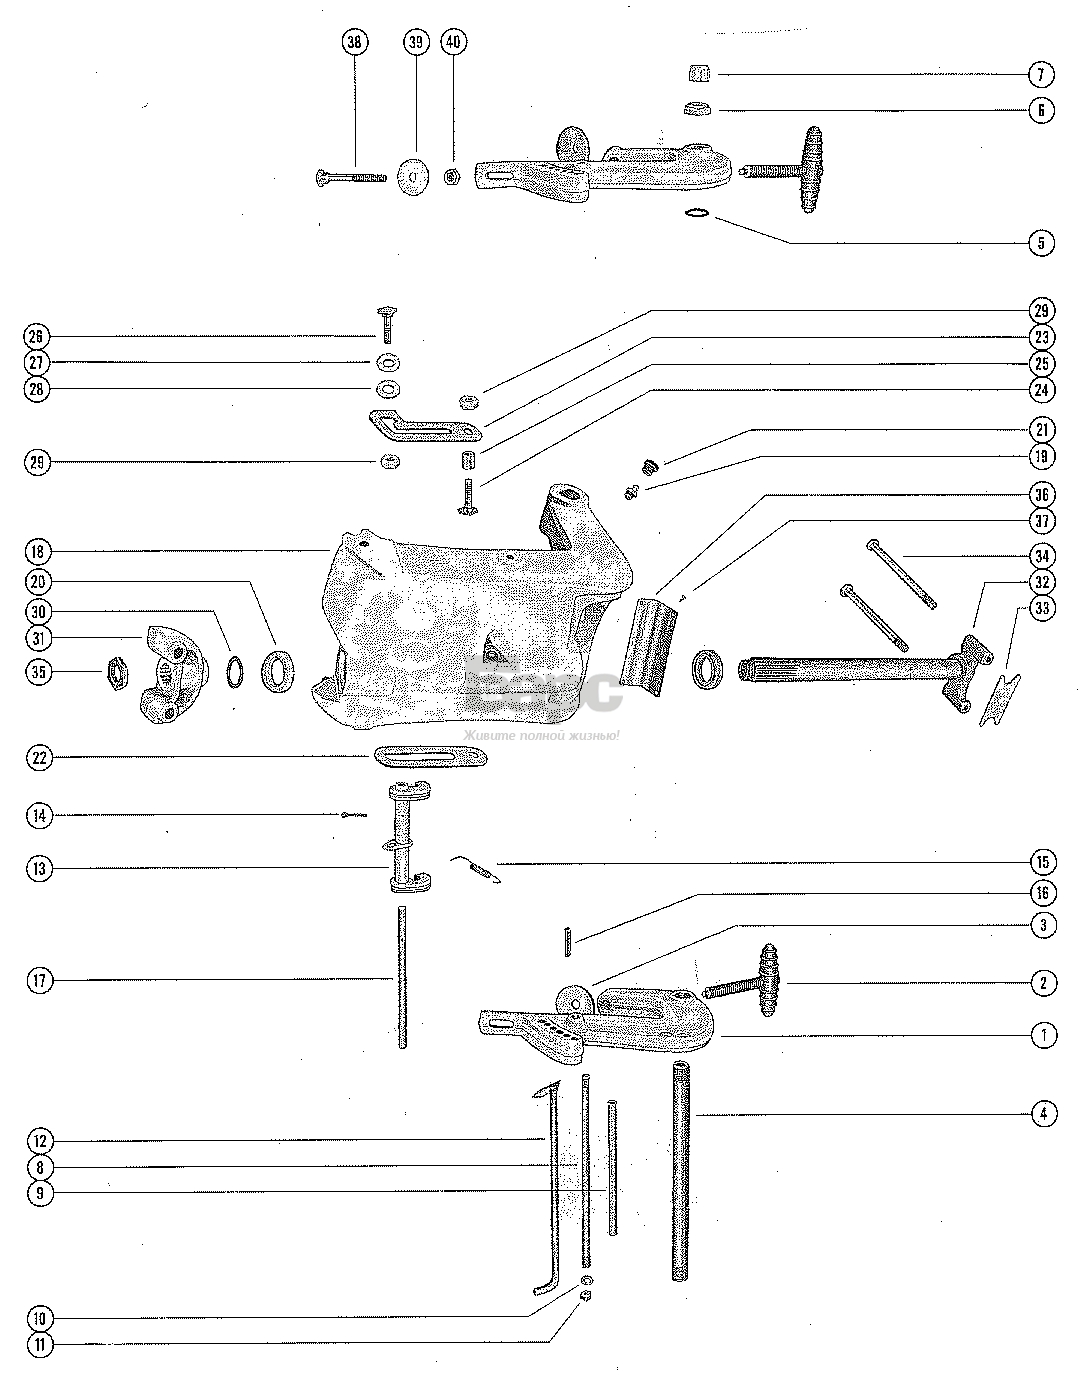 CLAMP AND SWIVEL BRACKET ASSEMBLY